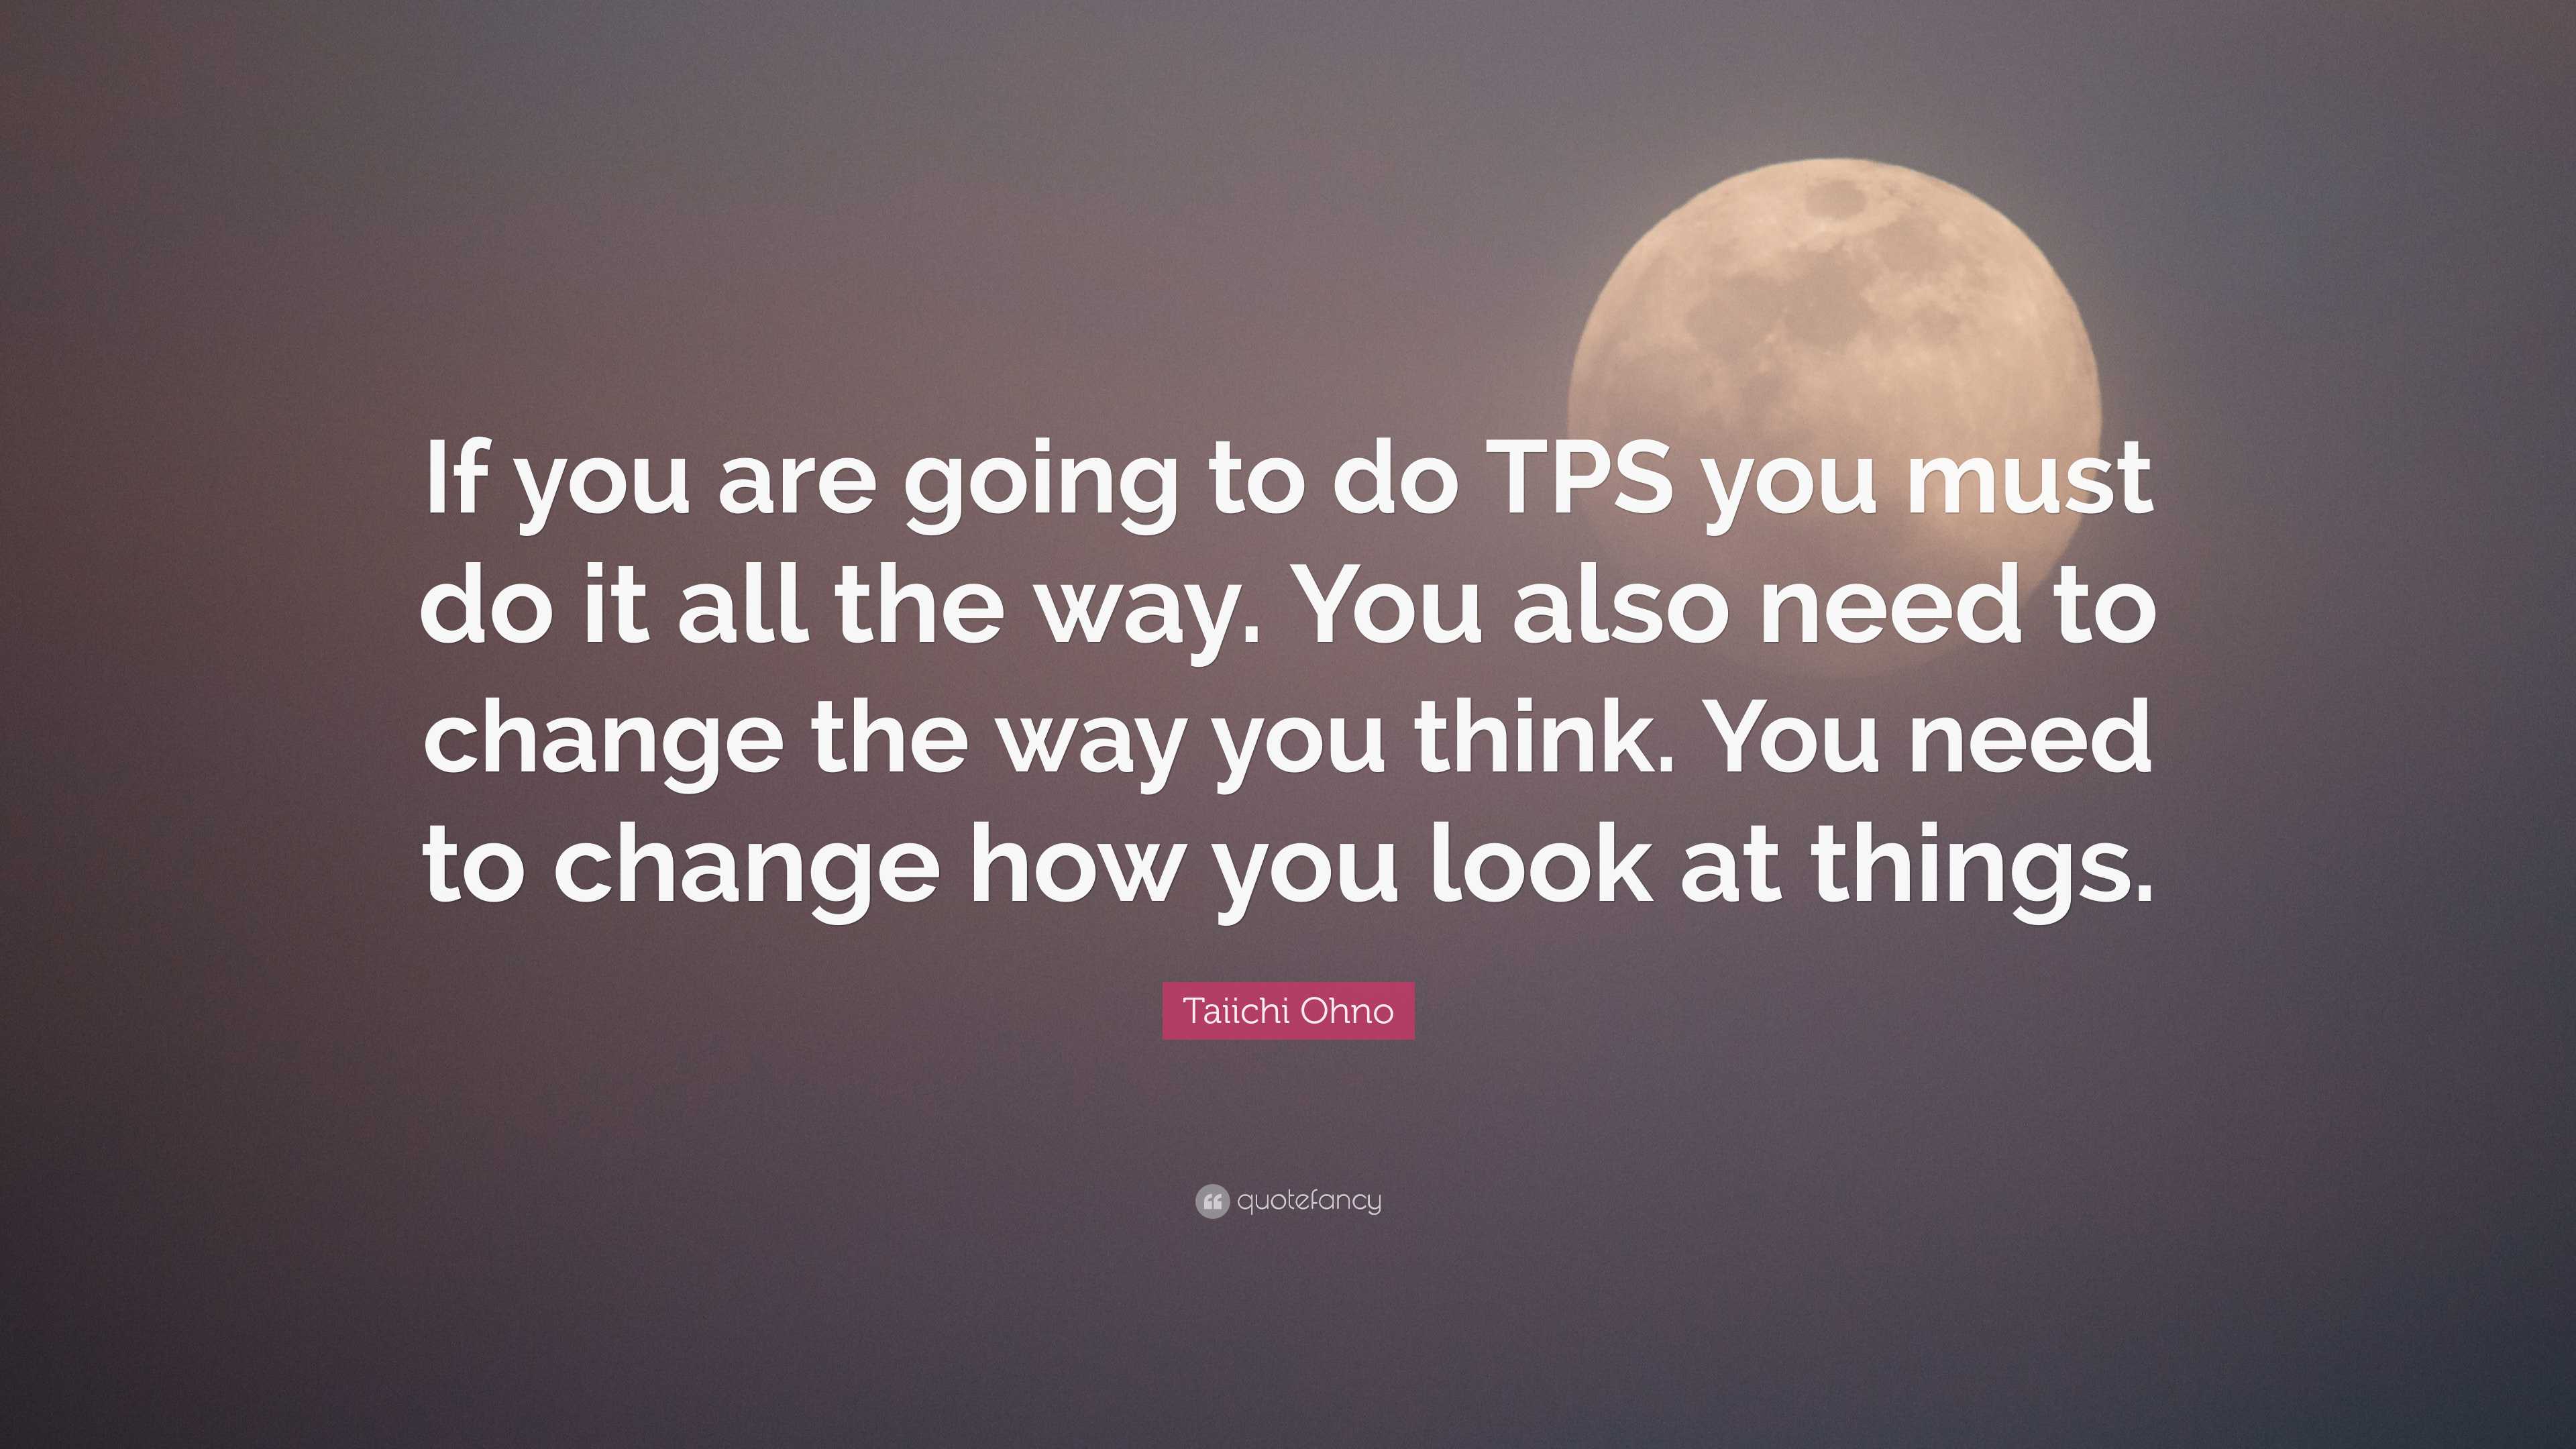 Taiichi Ohno Quote: “If you are going to do TPS you must do it all the way.  You also need to change the way you think. You need to change how”